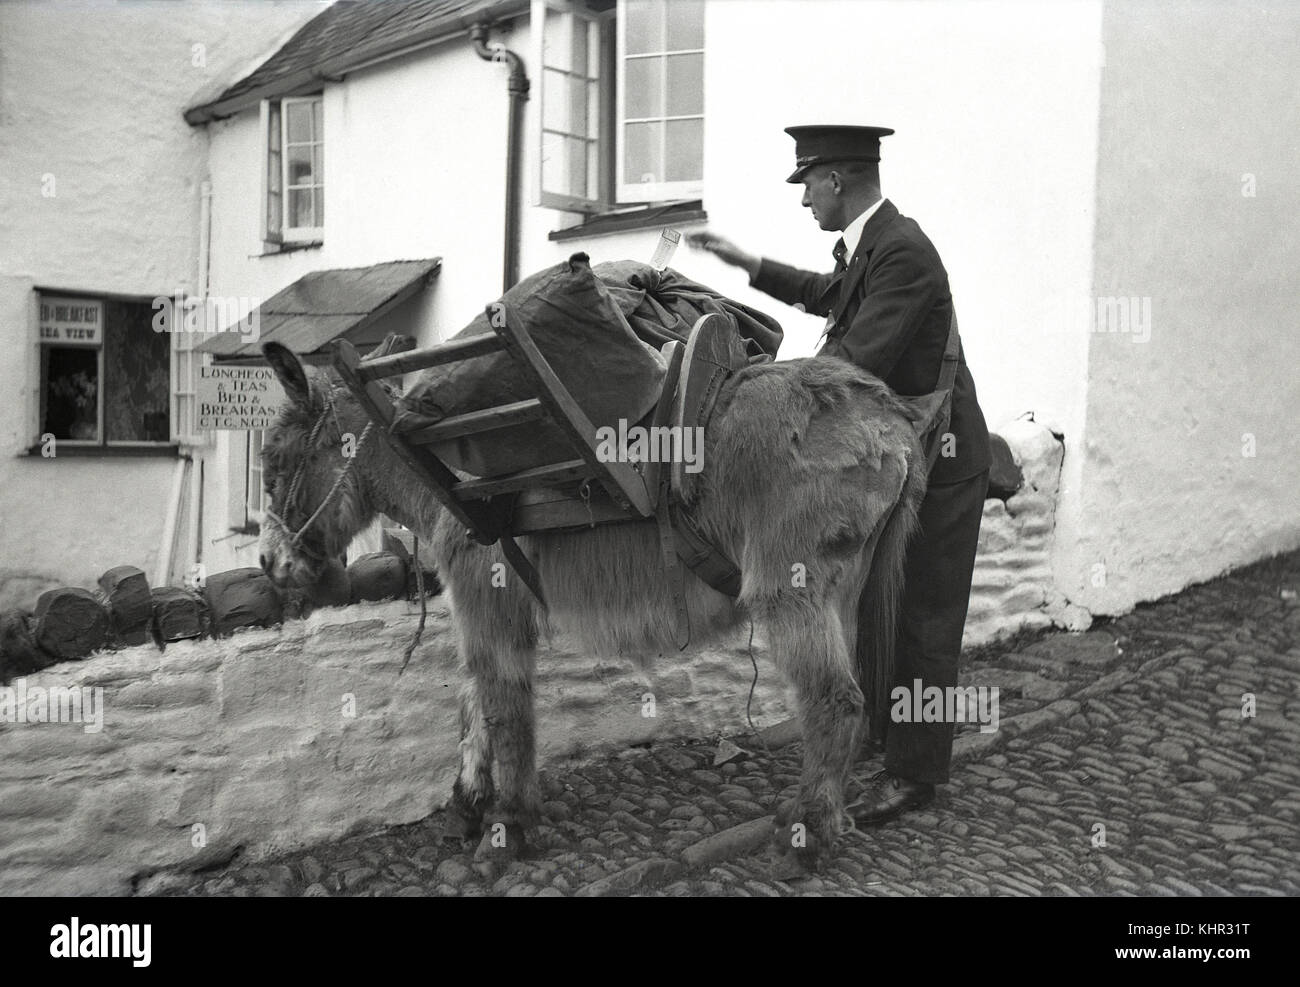 1950s, a smart postman wearing his hat with his donkey who with a wooden harness is carrying the mail sacks. Taken at Covelly, Devon, England, UK, where the steep and narrow cobble streets saw donkeys used for many such purposes around the village and harbour. Stock Photo